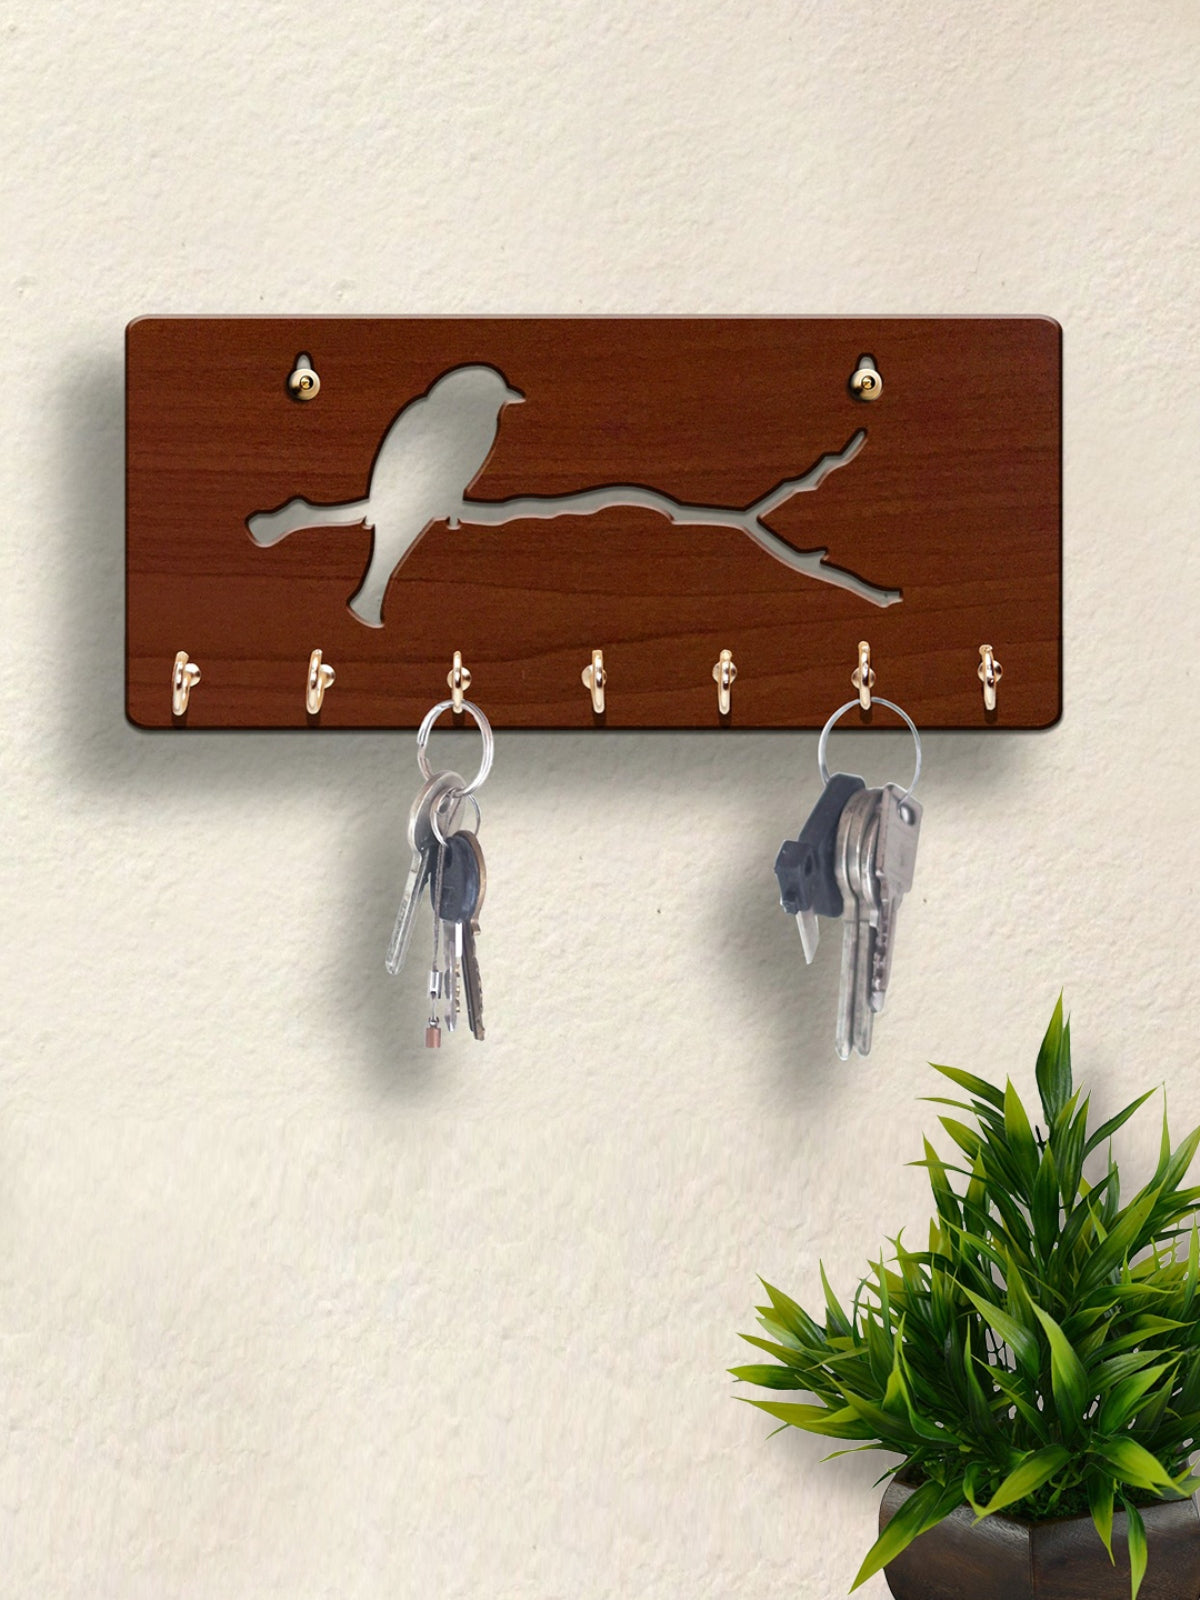 Wooden Key Holder With 7 Hooks For Home & Office Wall Decorative